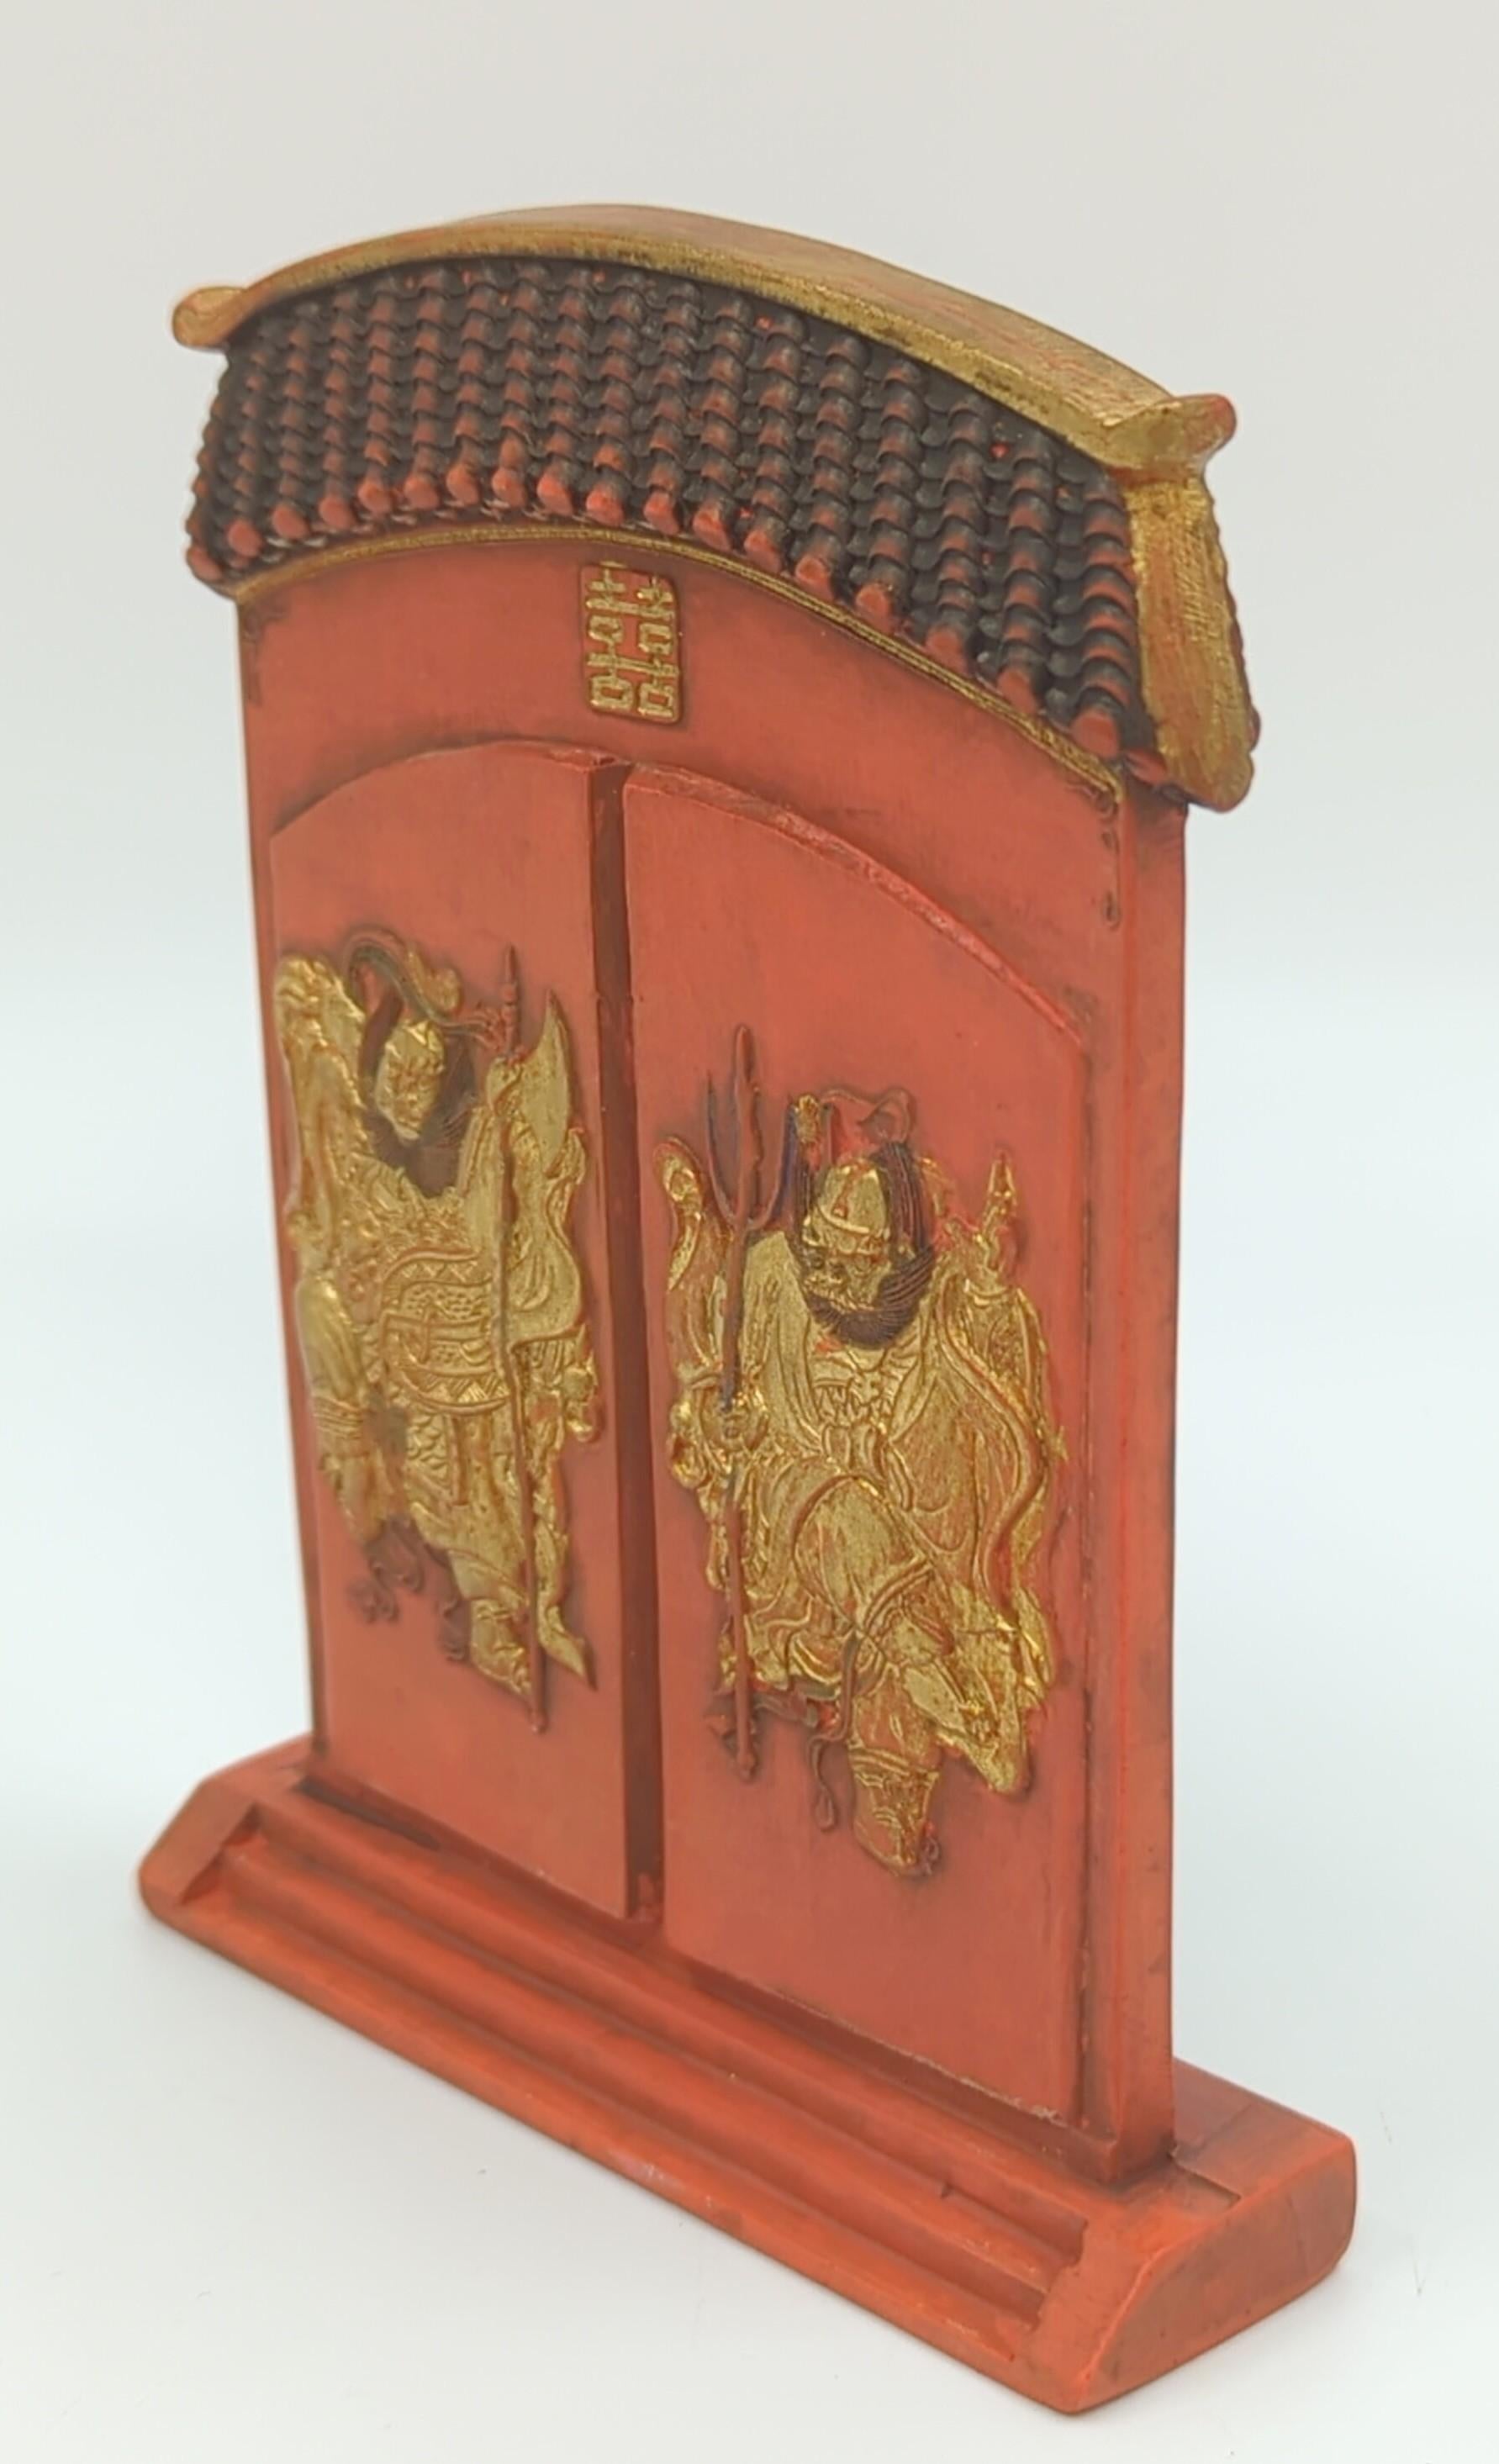 A rare antique Chinese Qing Dynasty Guangxu period Imperial style marked red ink stick, in the form of a roof tiled double door entrance way, with two fierce guardian dieties carved in detailed low relief, one on each door front, detailed in gilt